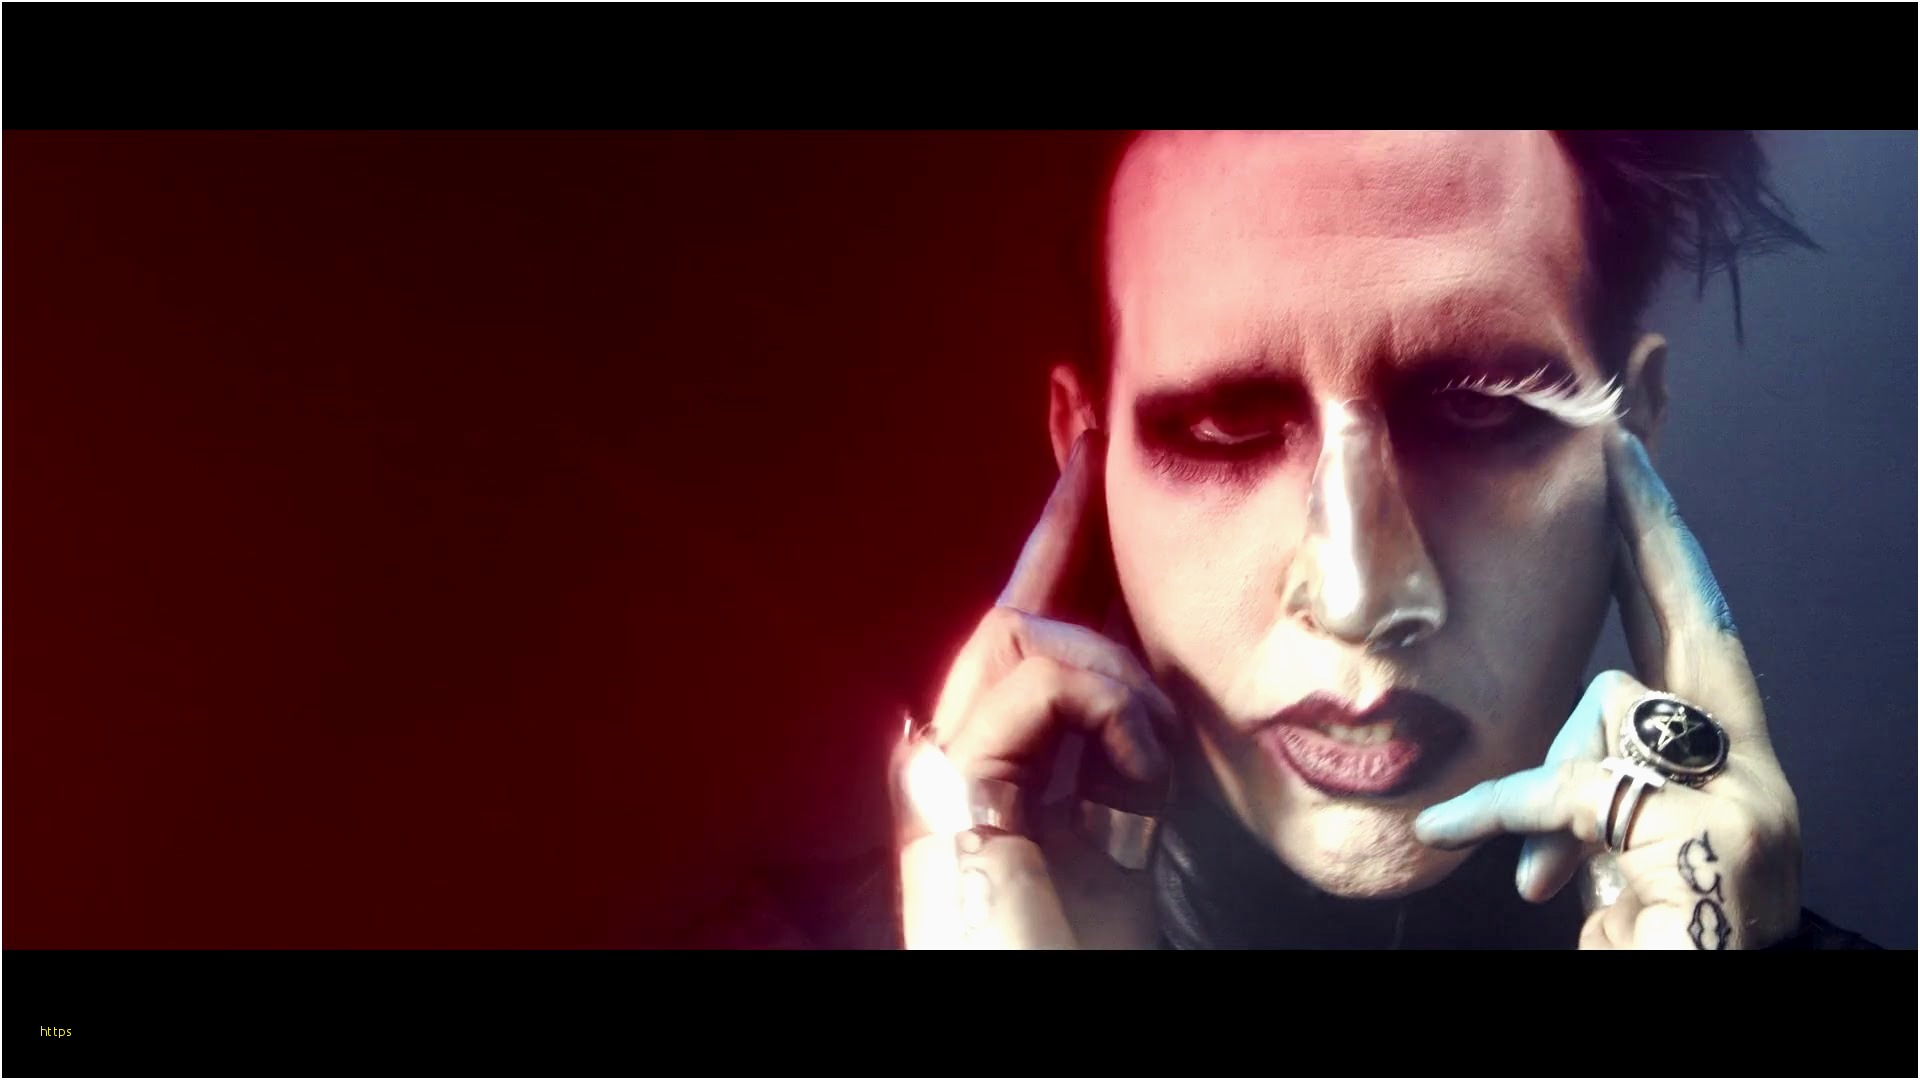 Thumb Image - Marilyn Manson Third Day Of A Seven Day Binge , HD Wallpaper & Backgrounds